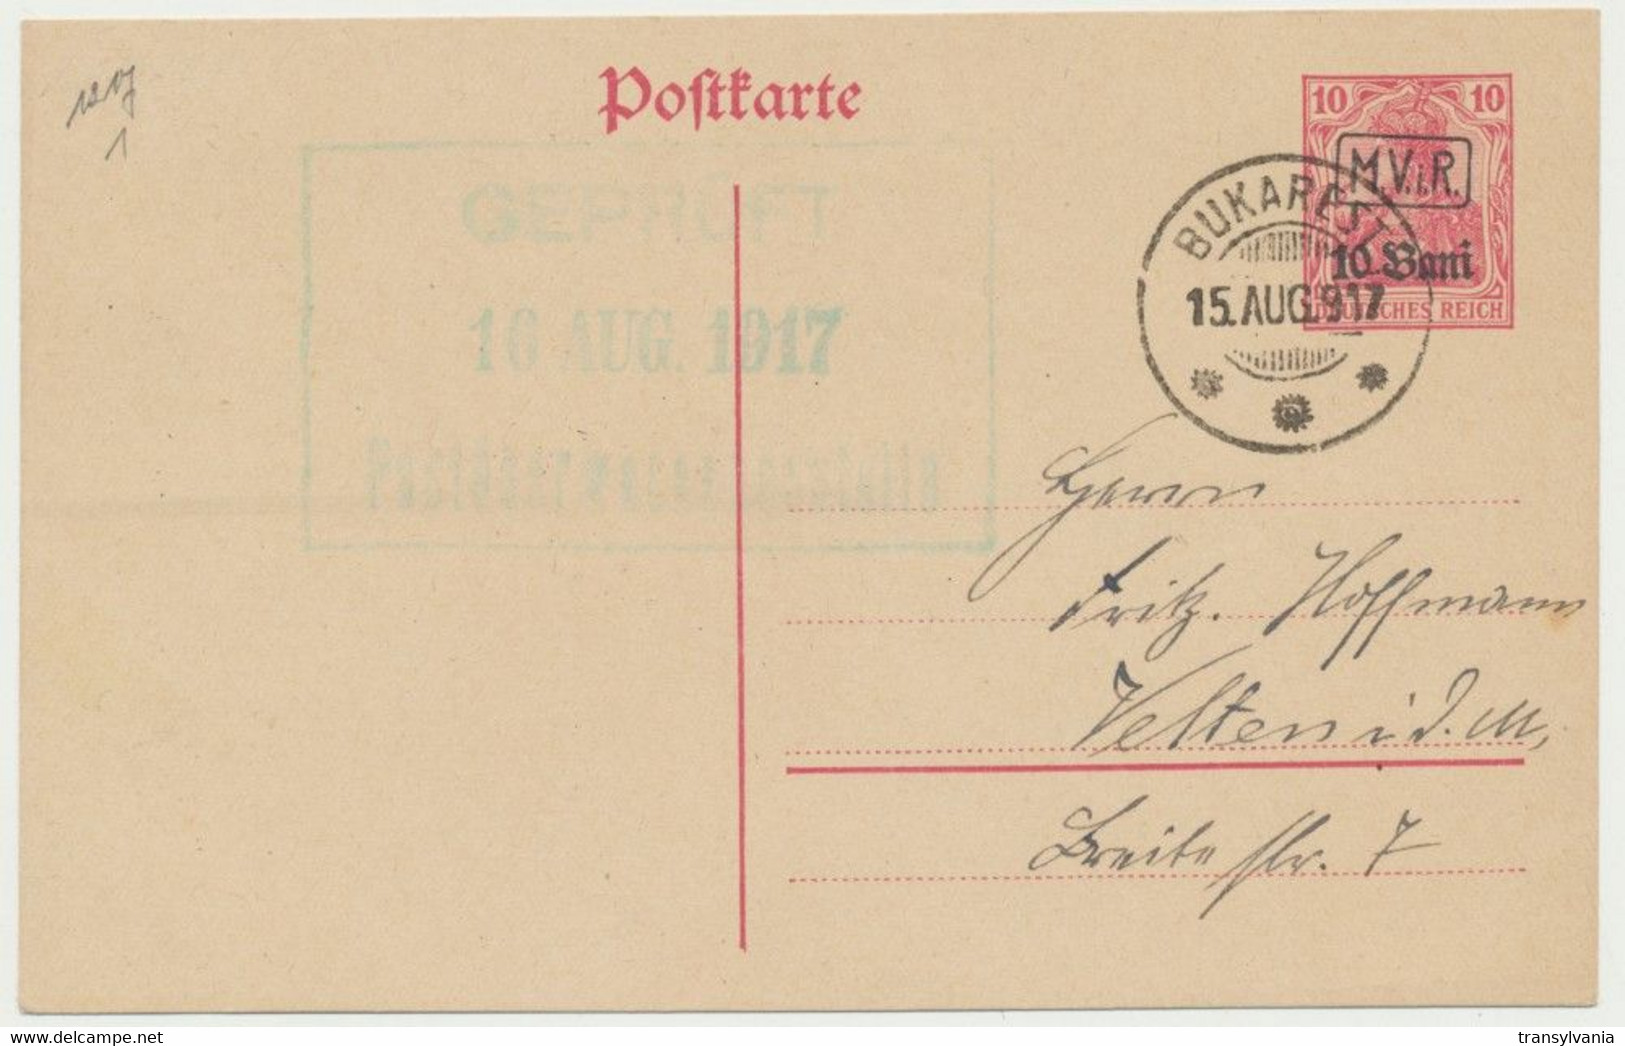 WW1 Germany Occupation In Romania 1917 MViR Overprinted Stationary Card Mailed Censored From Bucharest - Foreign Occupations